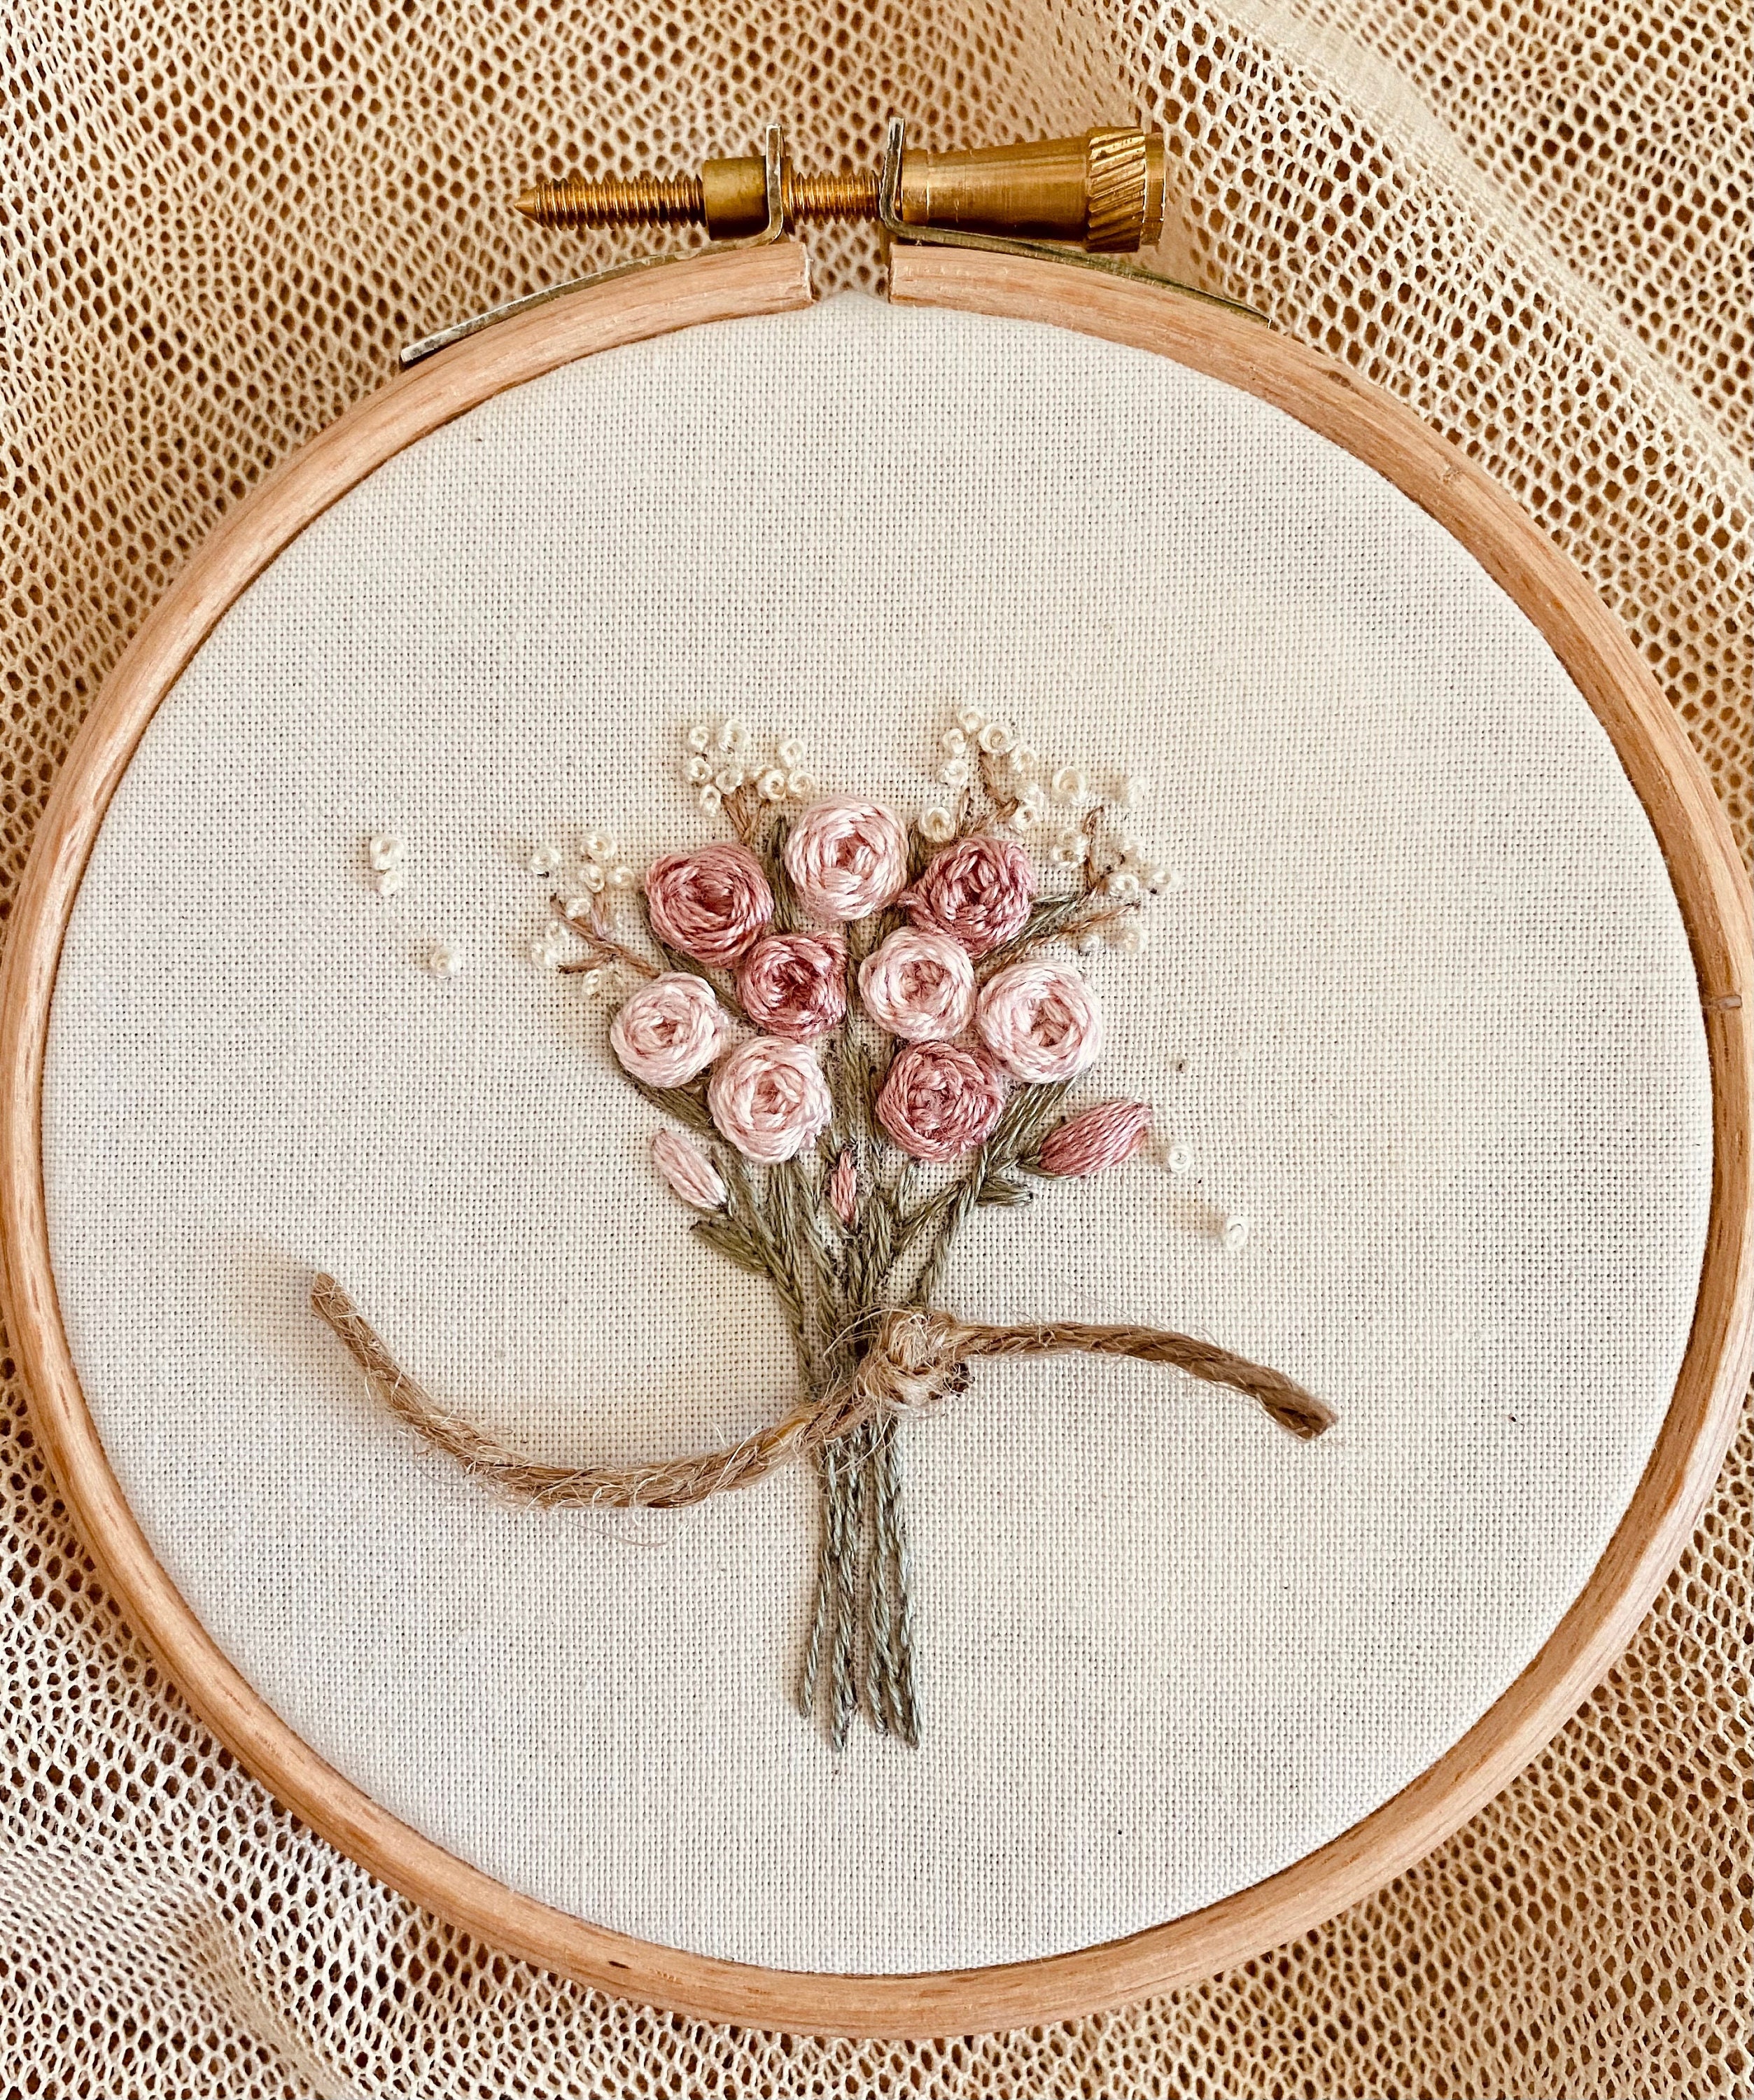 DIY Embroidery for Beginners / European Mesh Embroidery / Flowers